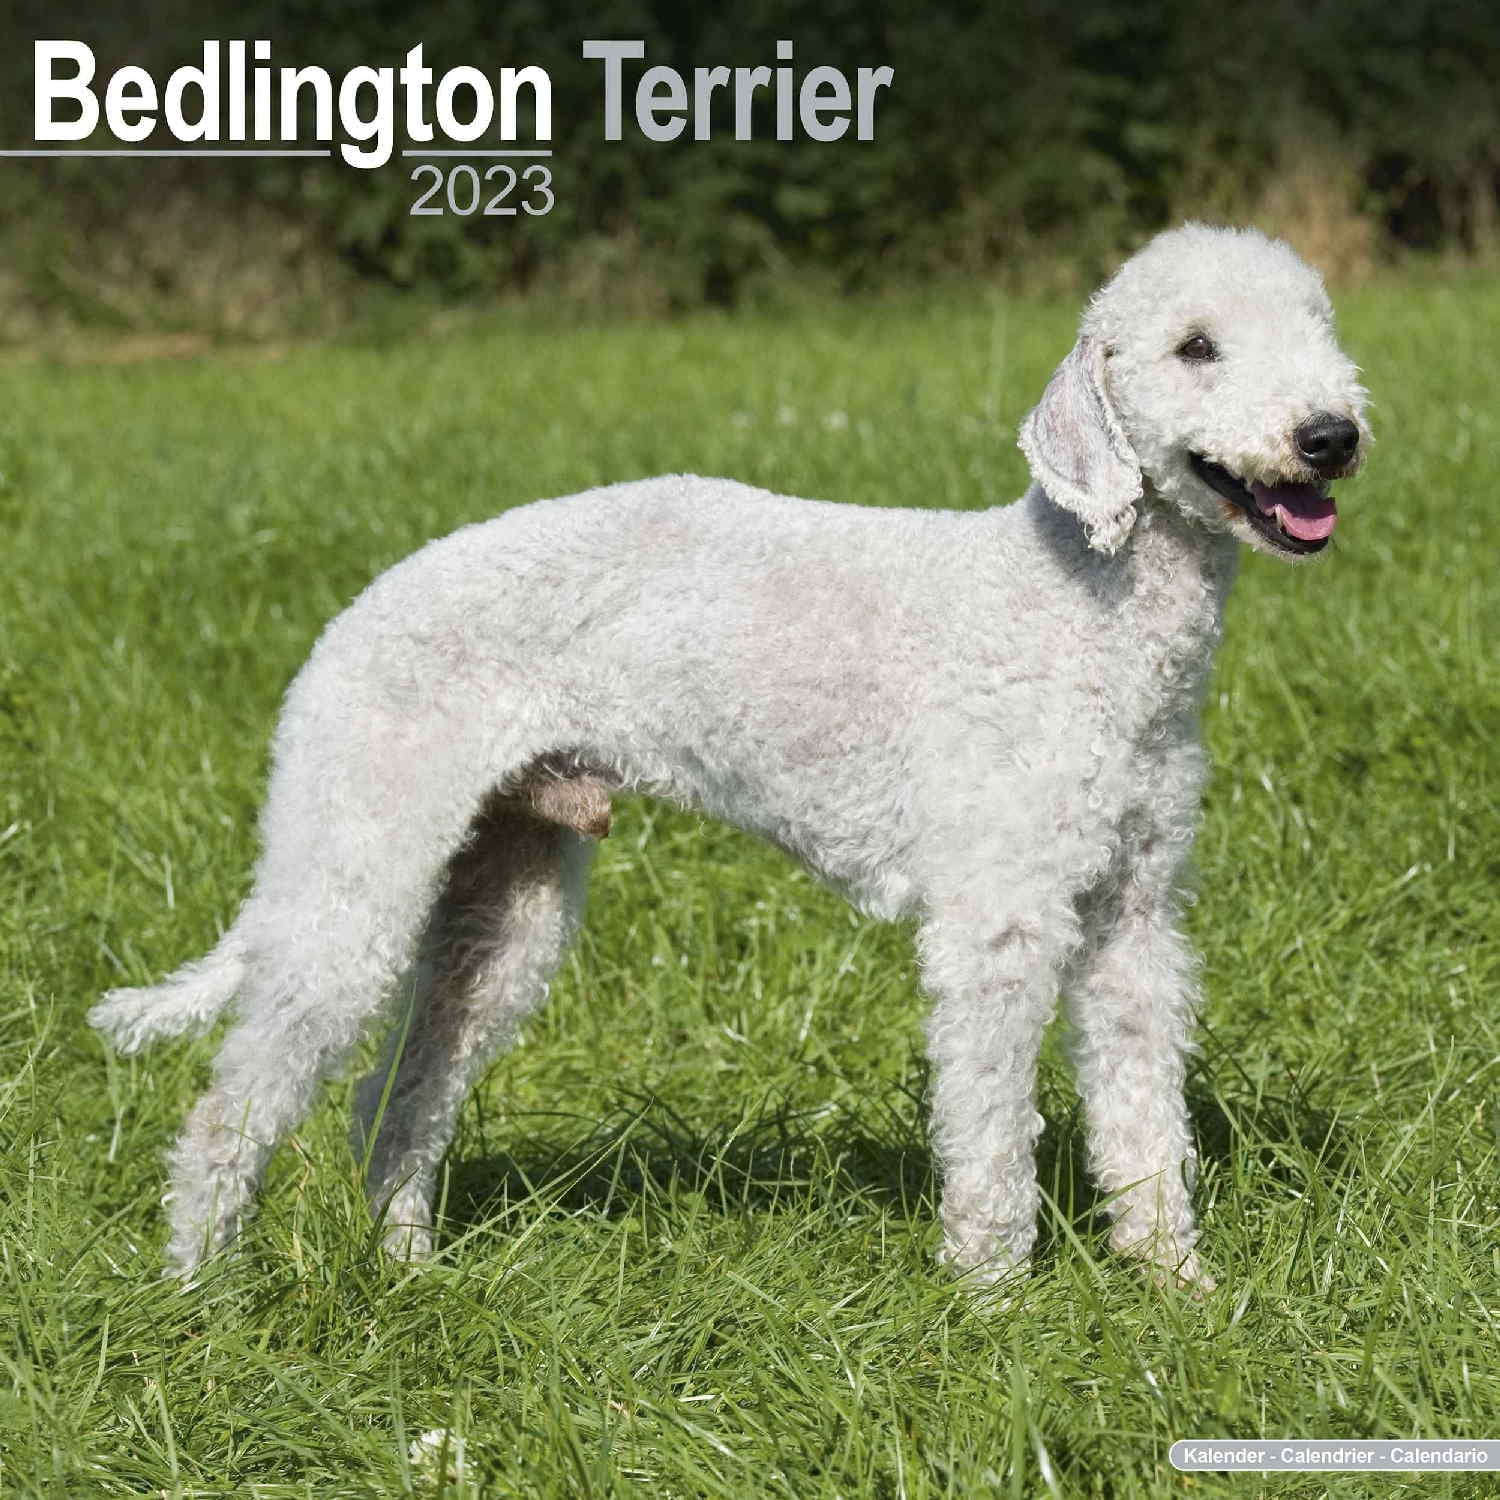 are bedlington terriers good with cats